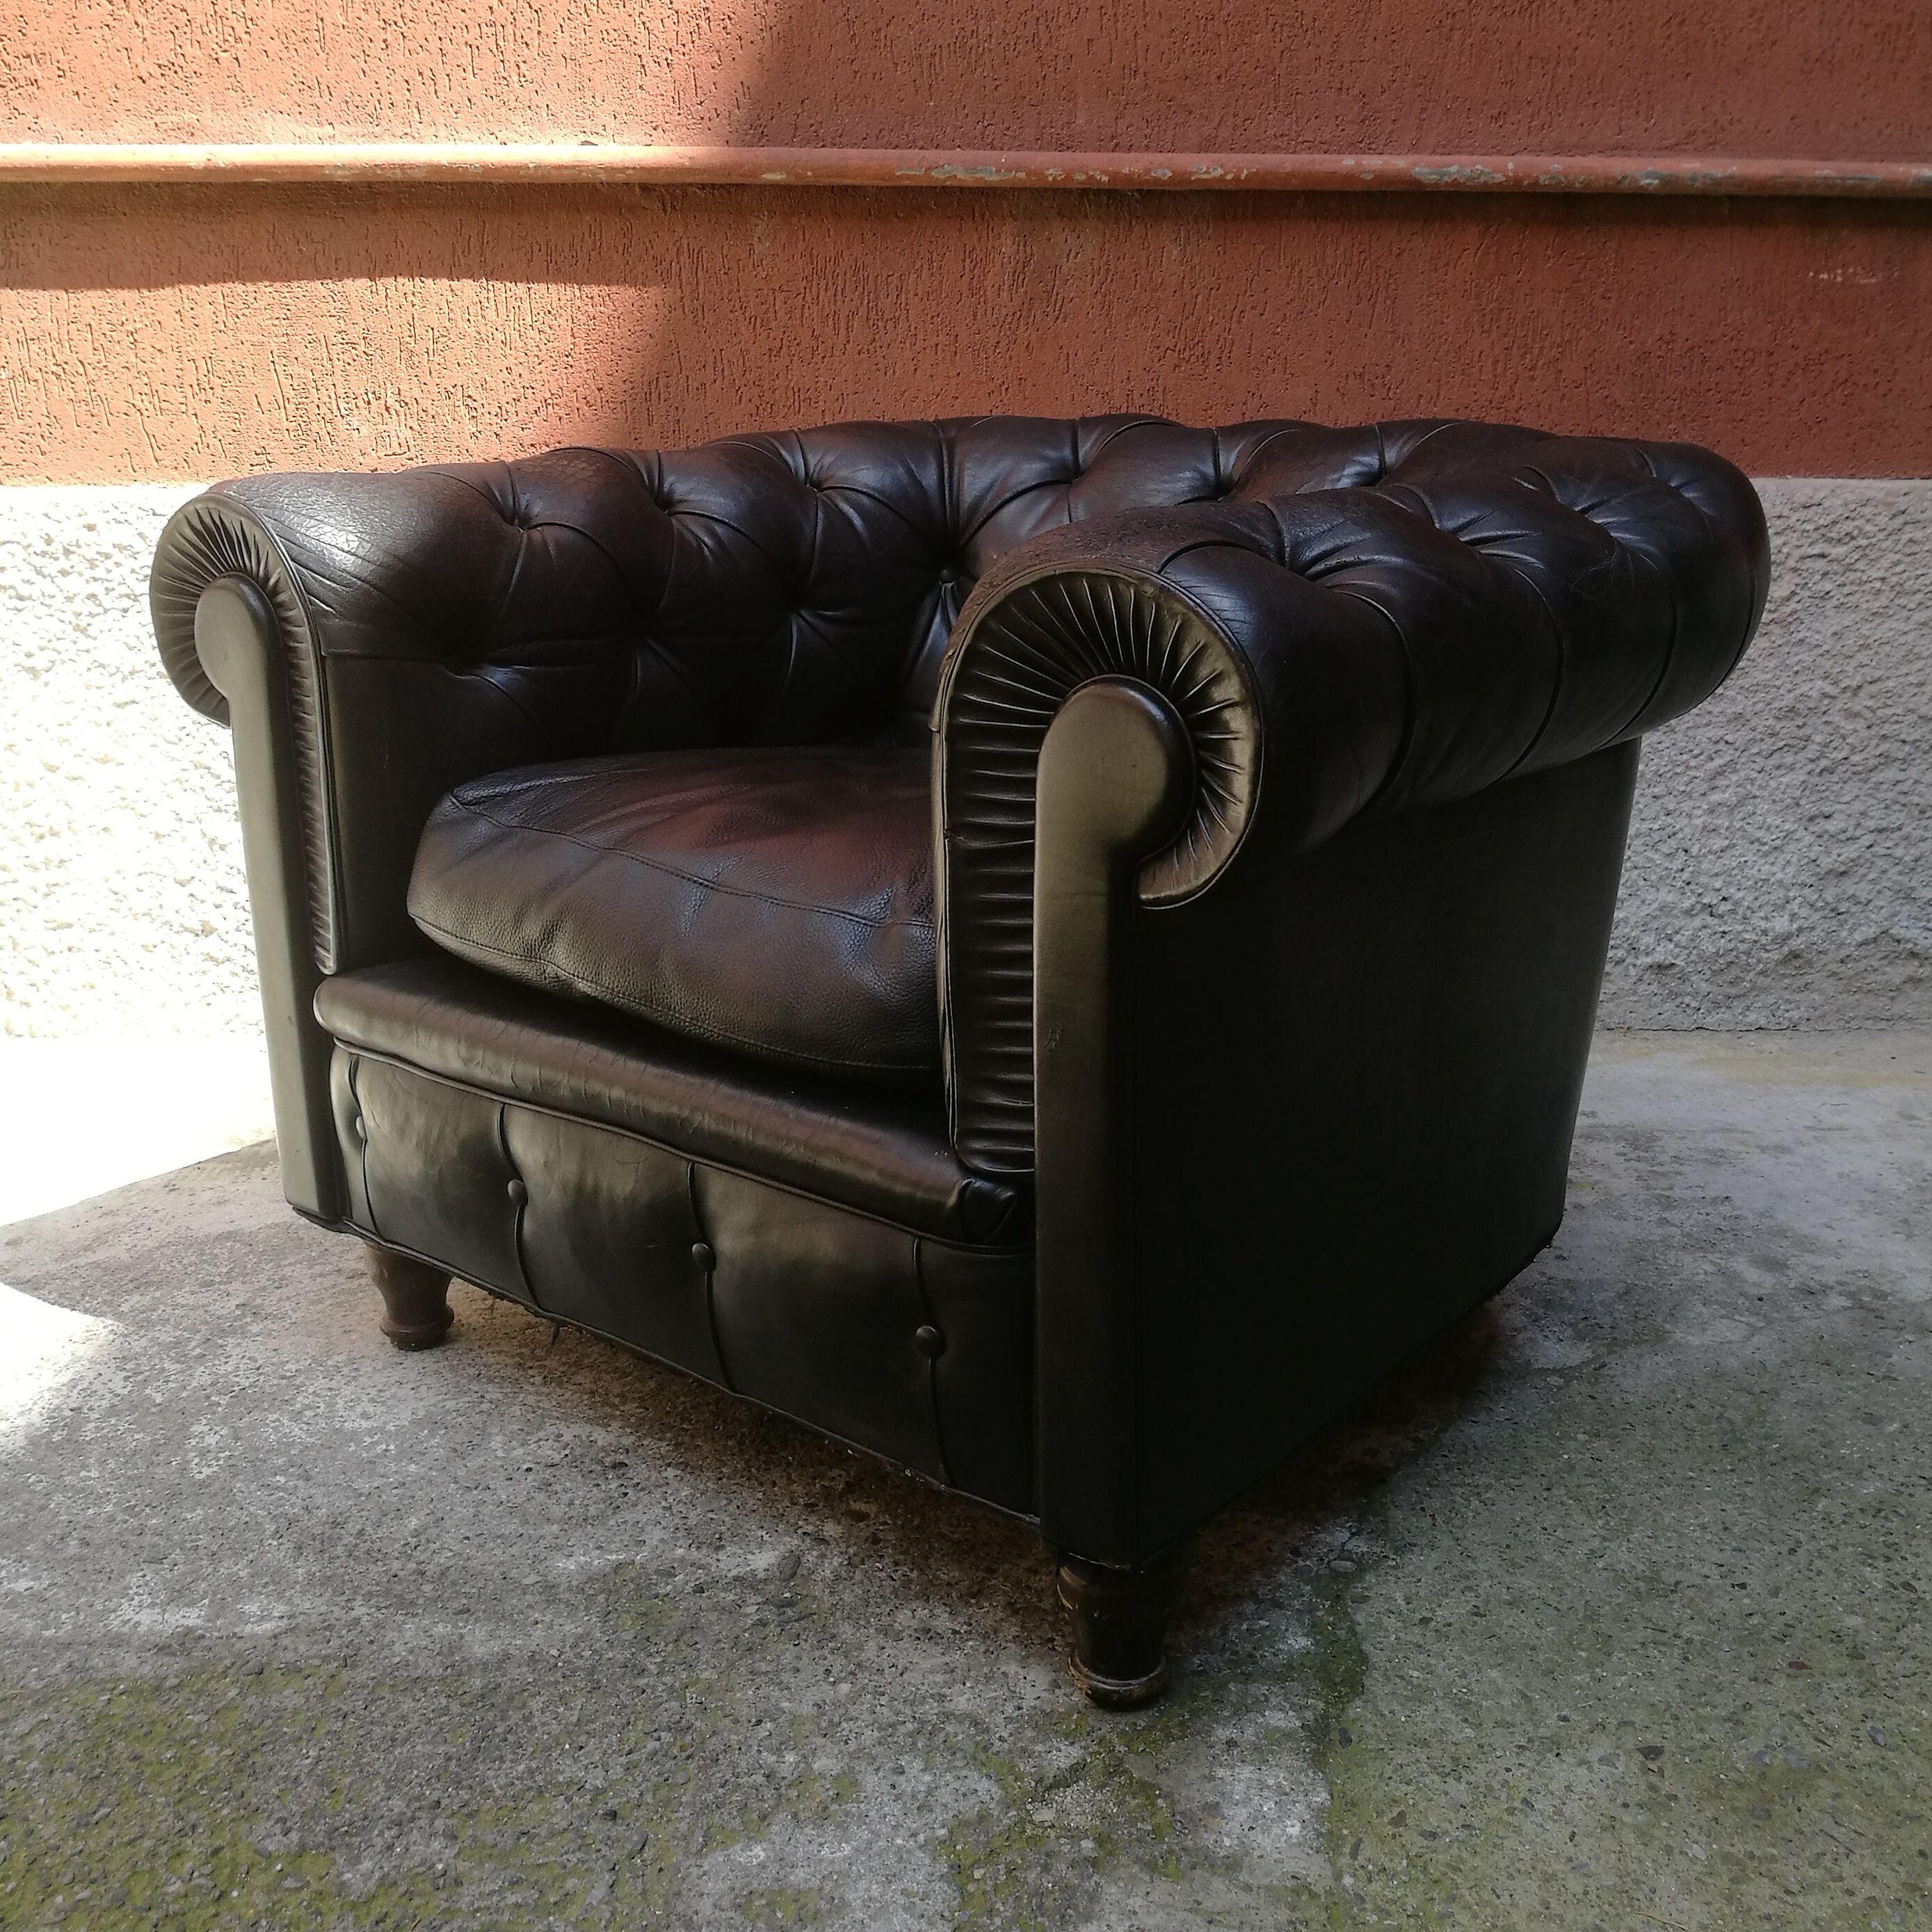 Mid-20th Century Black Lather Italian Chester Poltrona Frau Original Armchairs from 1960s